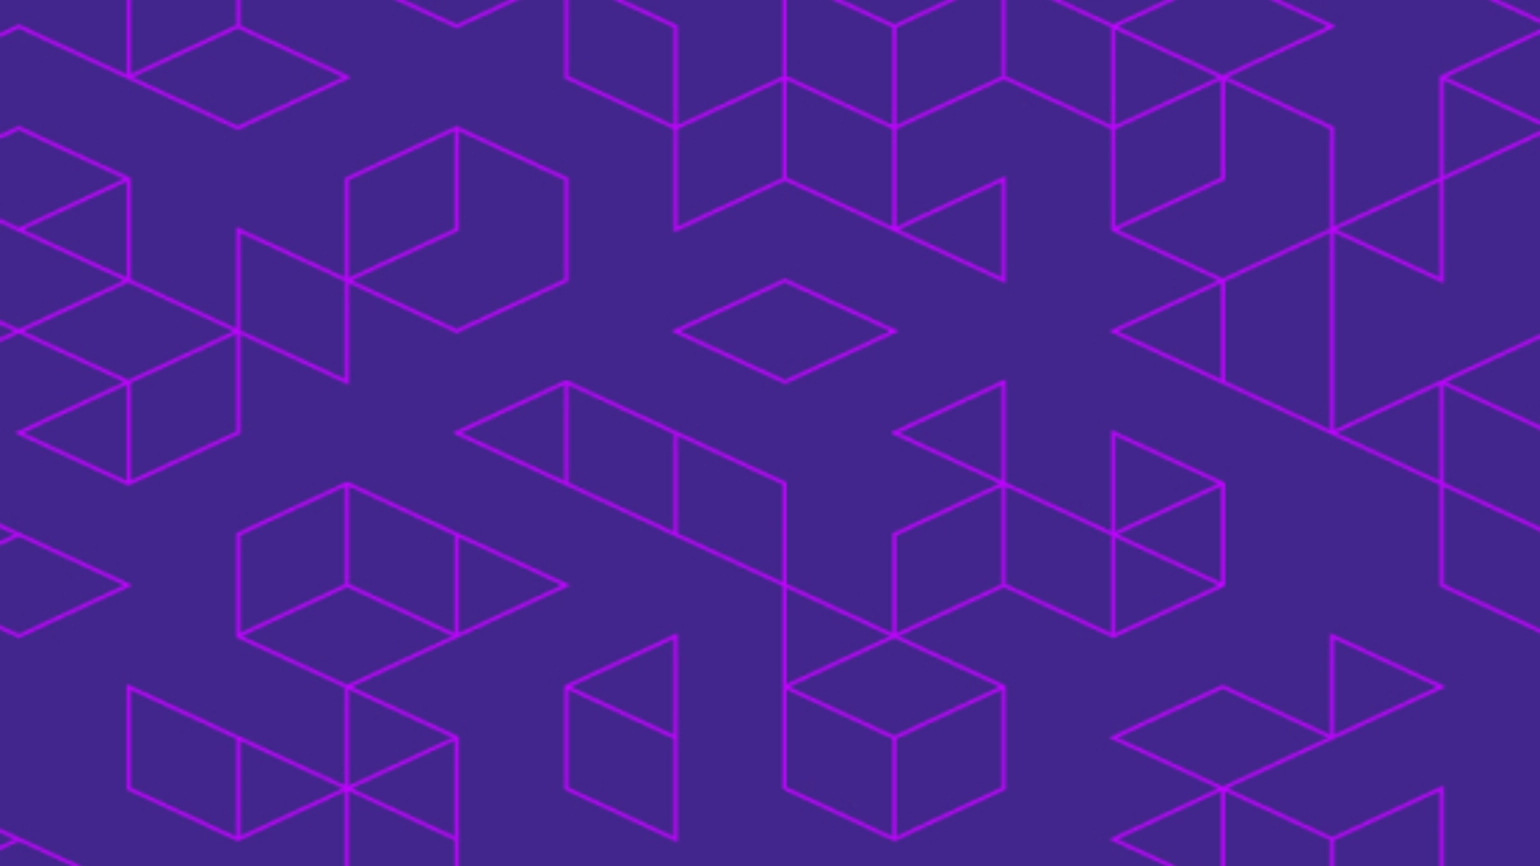 The pattern of the design for Entain's report on purple background